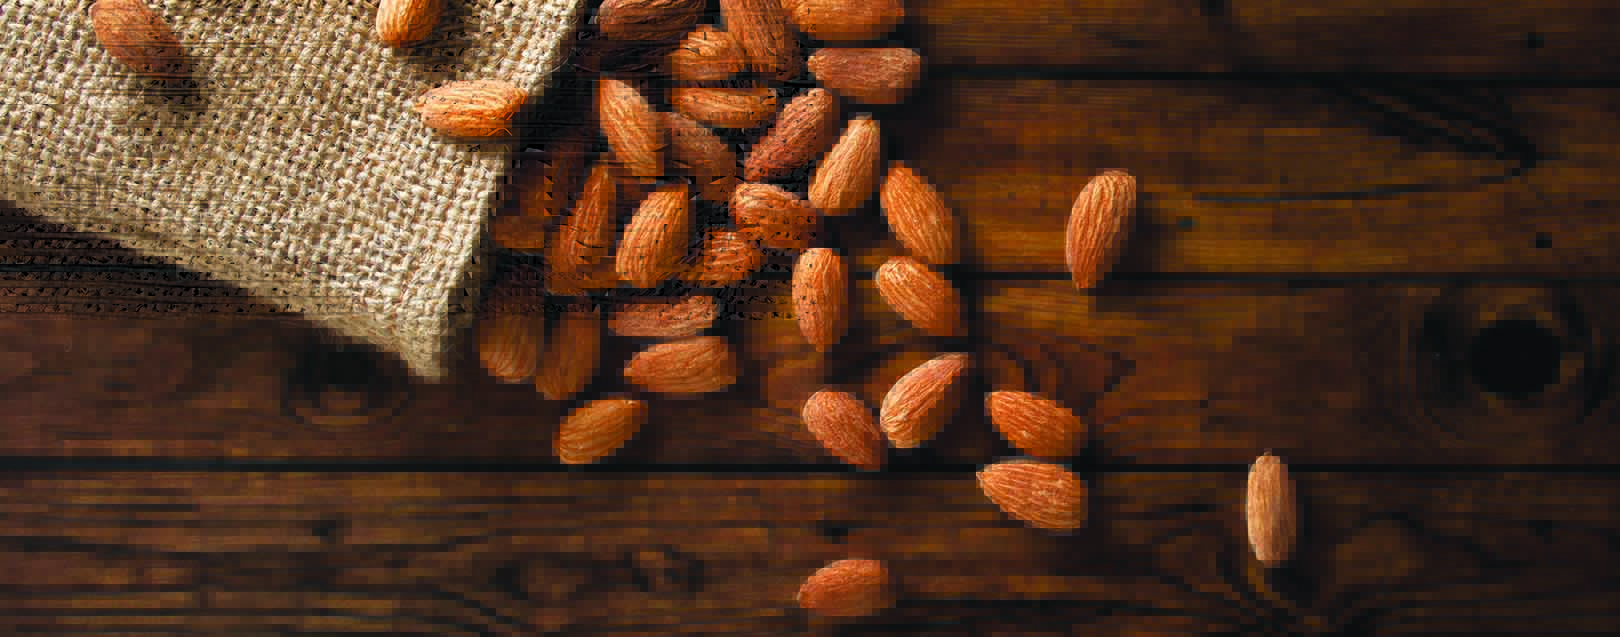 Almond - Nothing nutty about this March 2018 issue